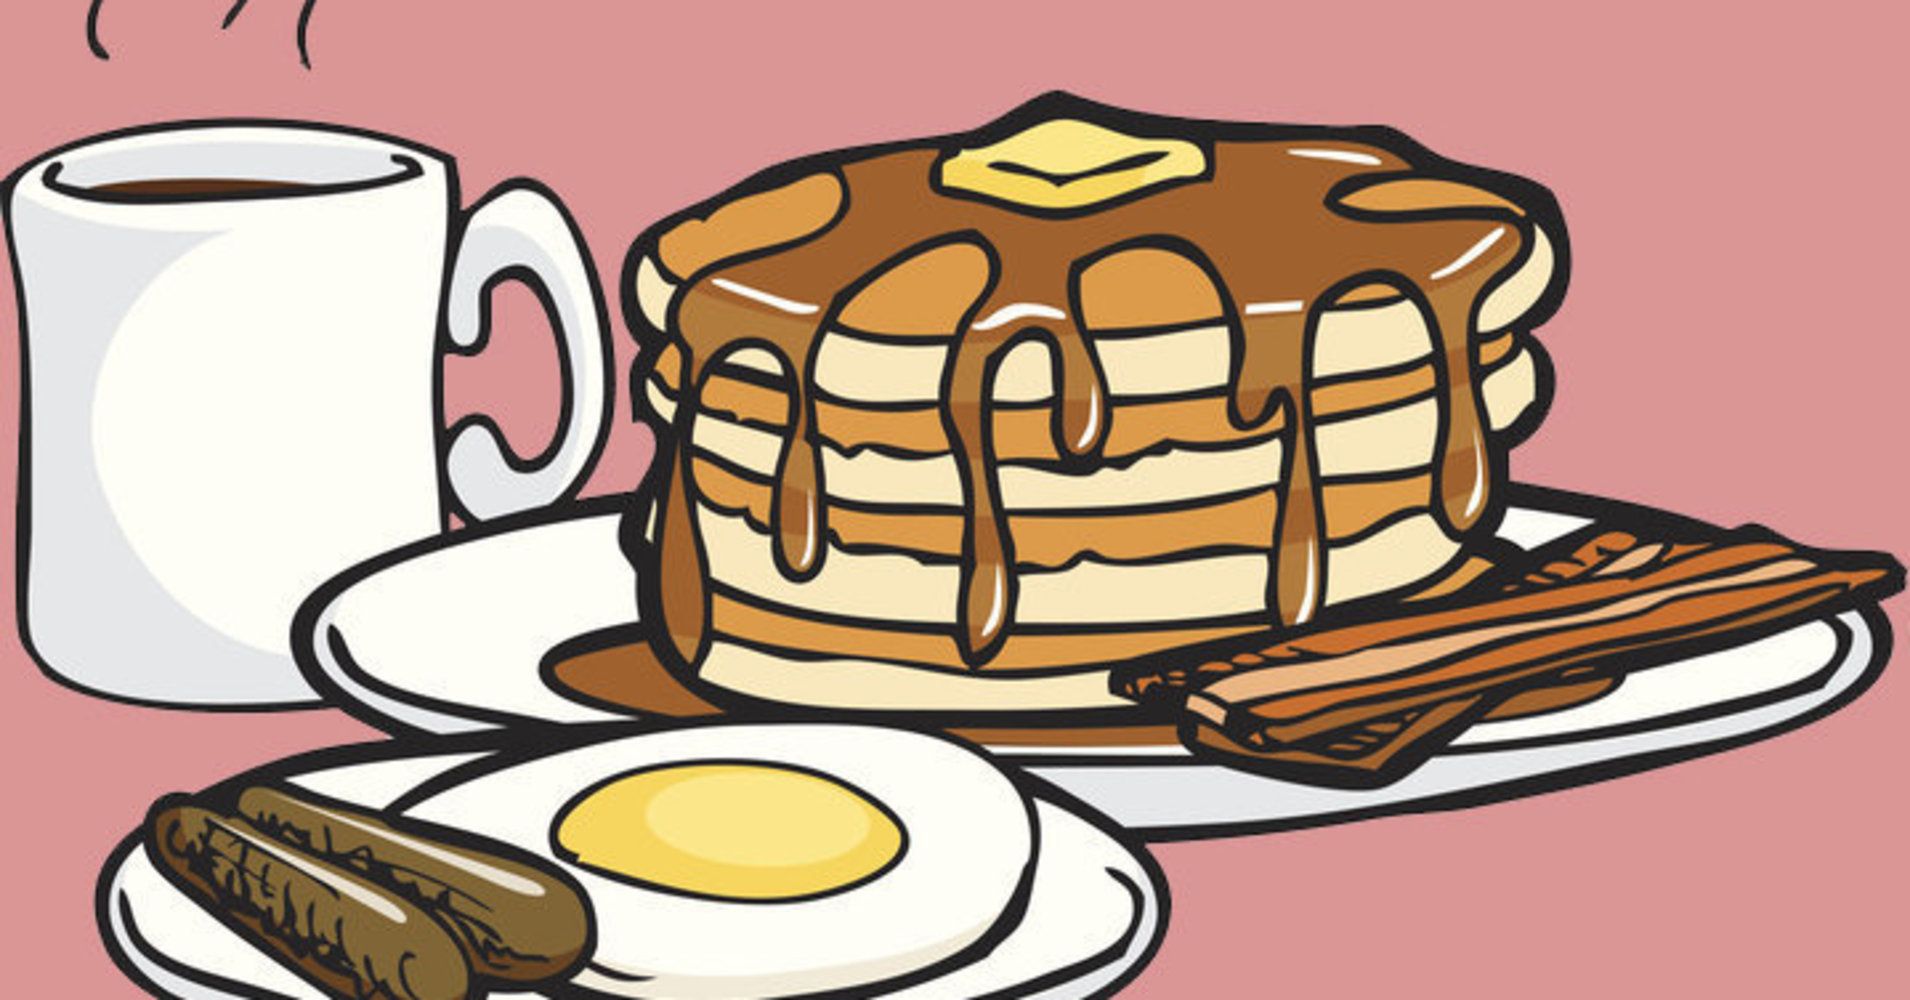 pancakes clipart cooked breakfast